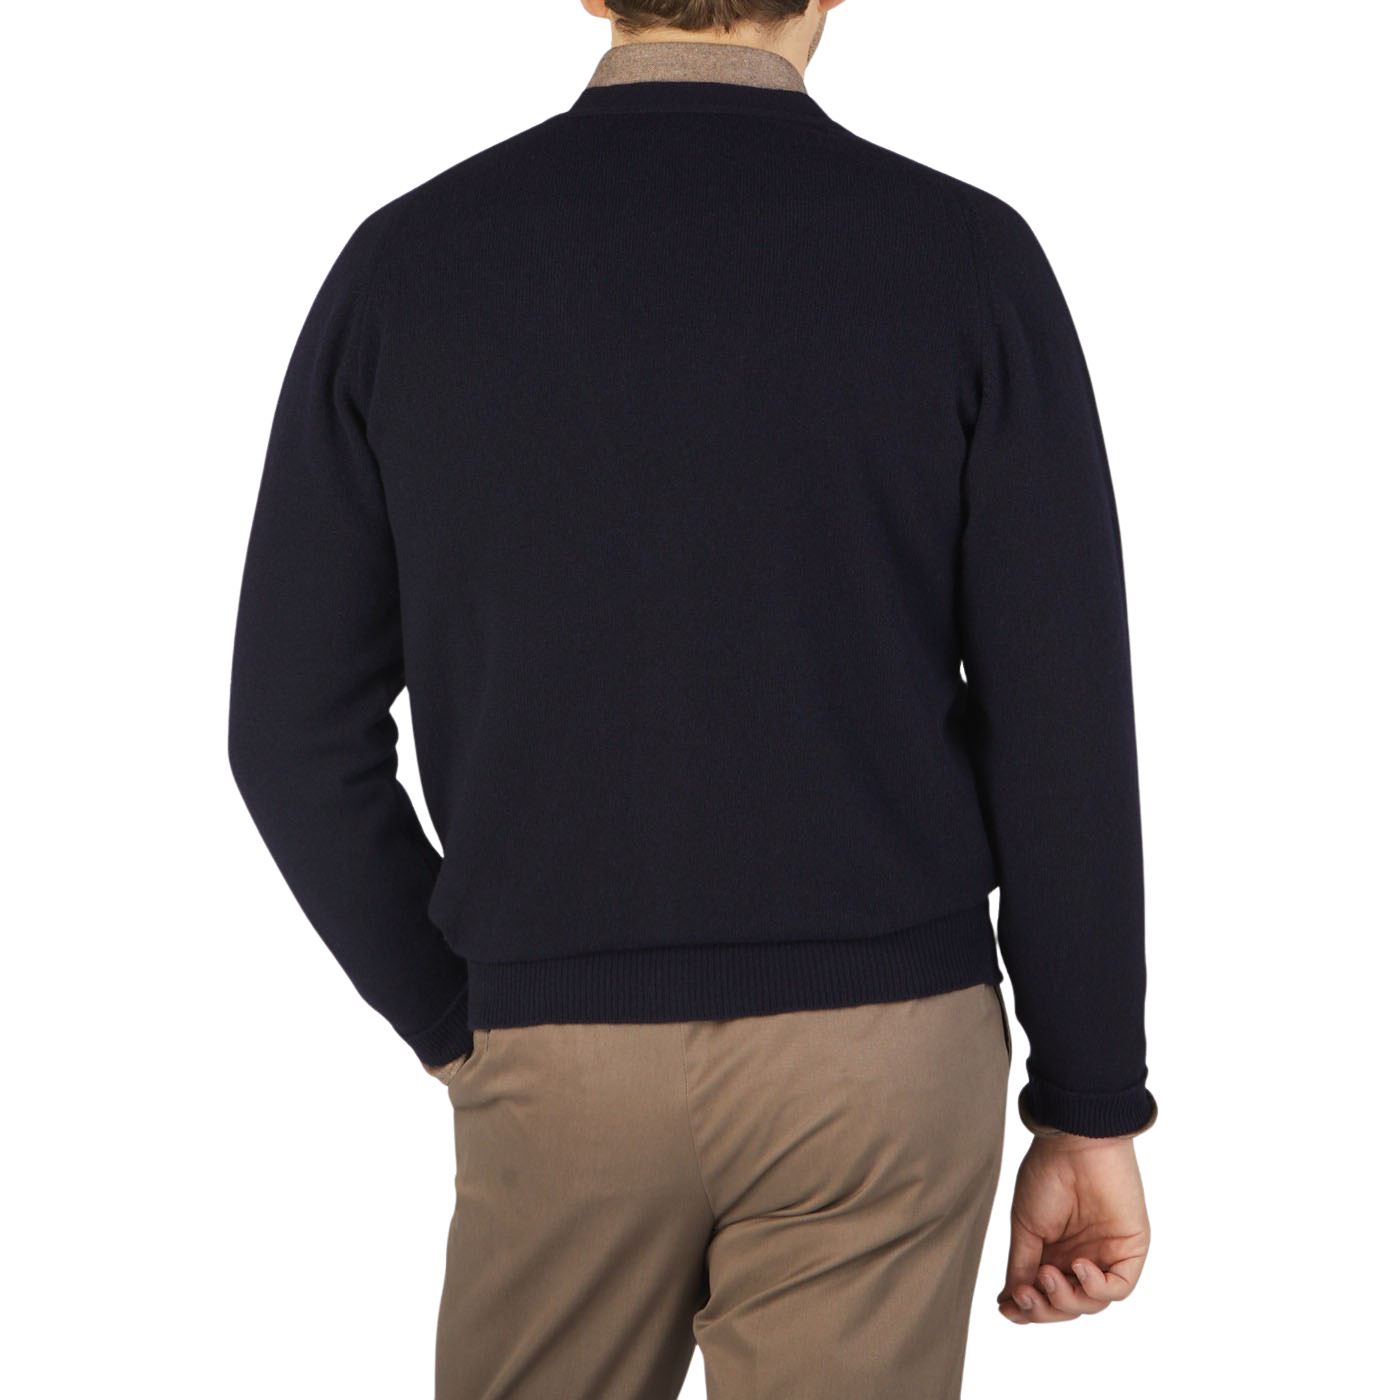 The back view of a man wearing a William Lockie Navy Lambswool Saddle Shoulder Cardigan and tan pants.